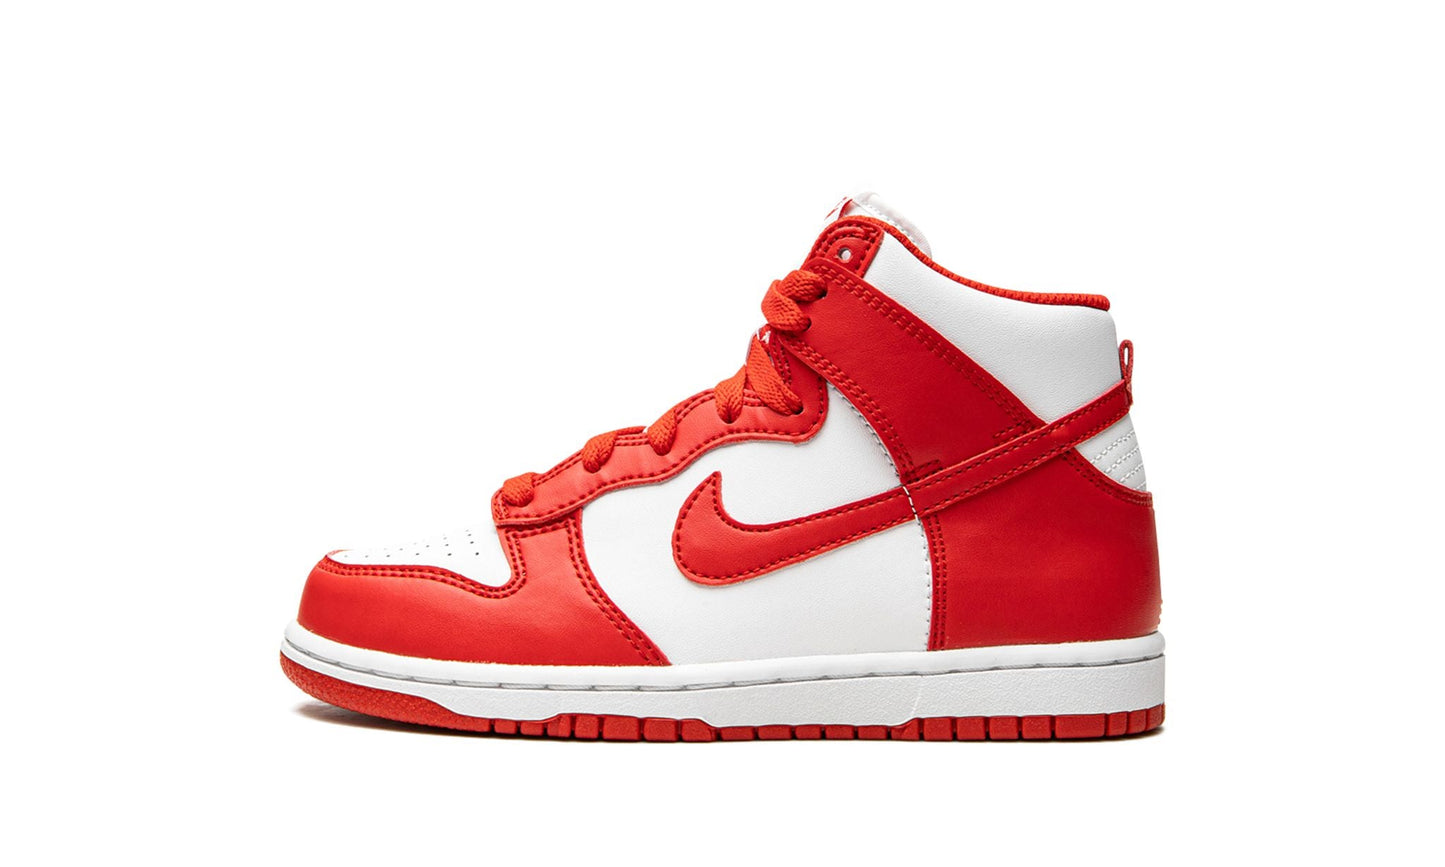 NIKE DUNK HIGH PS "University Red"